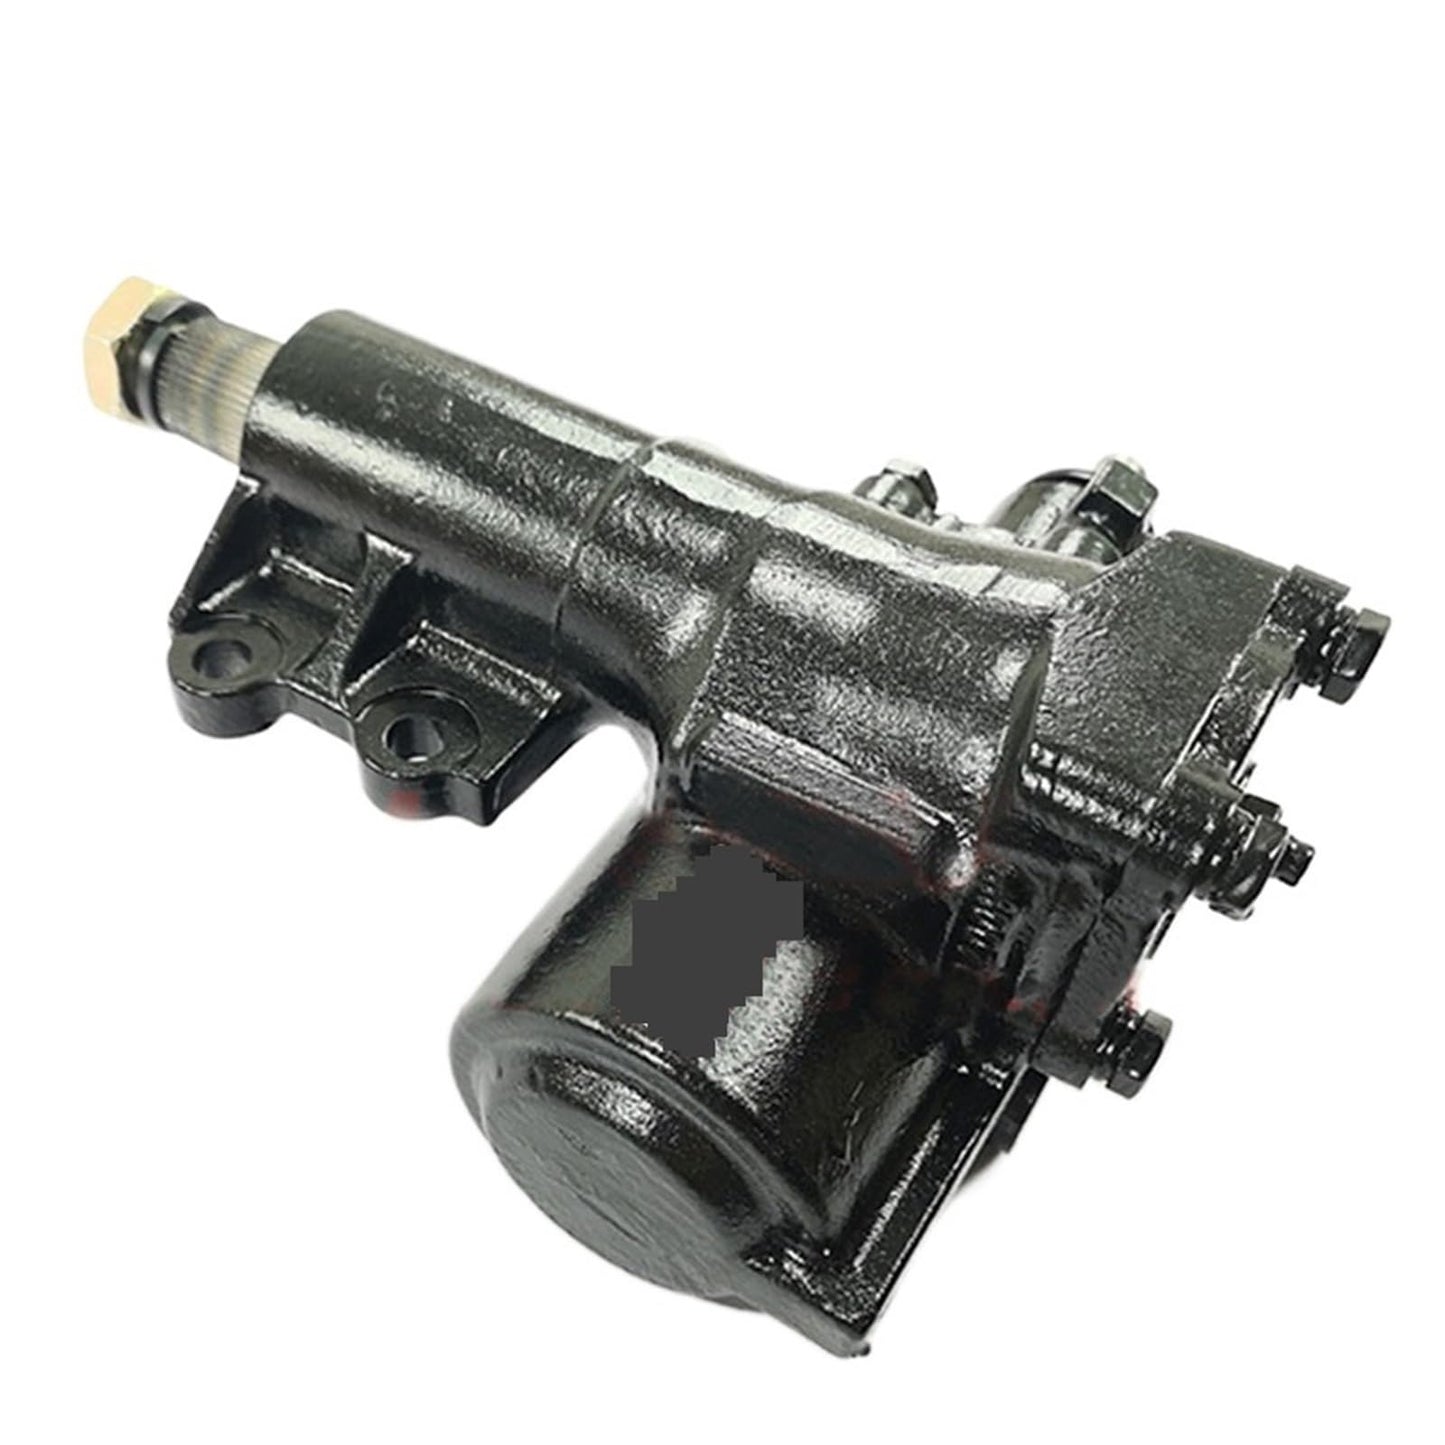 44110-60201 44110-60202 45411-60350 44110-60200 Power Steering Rack Gear With Toyota LAND CRUISER